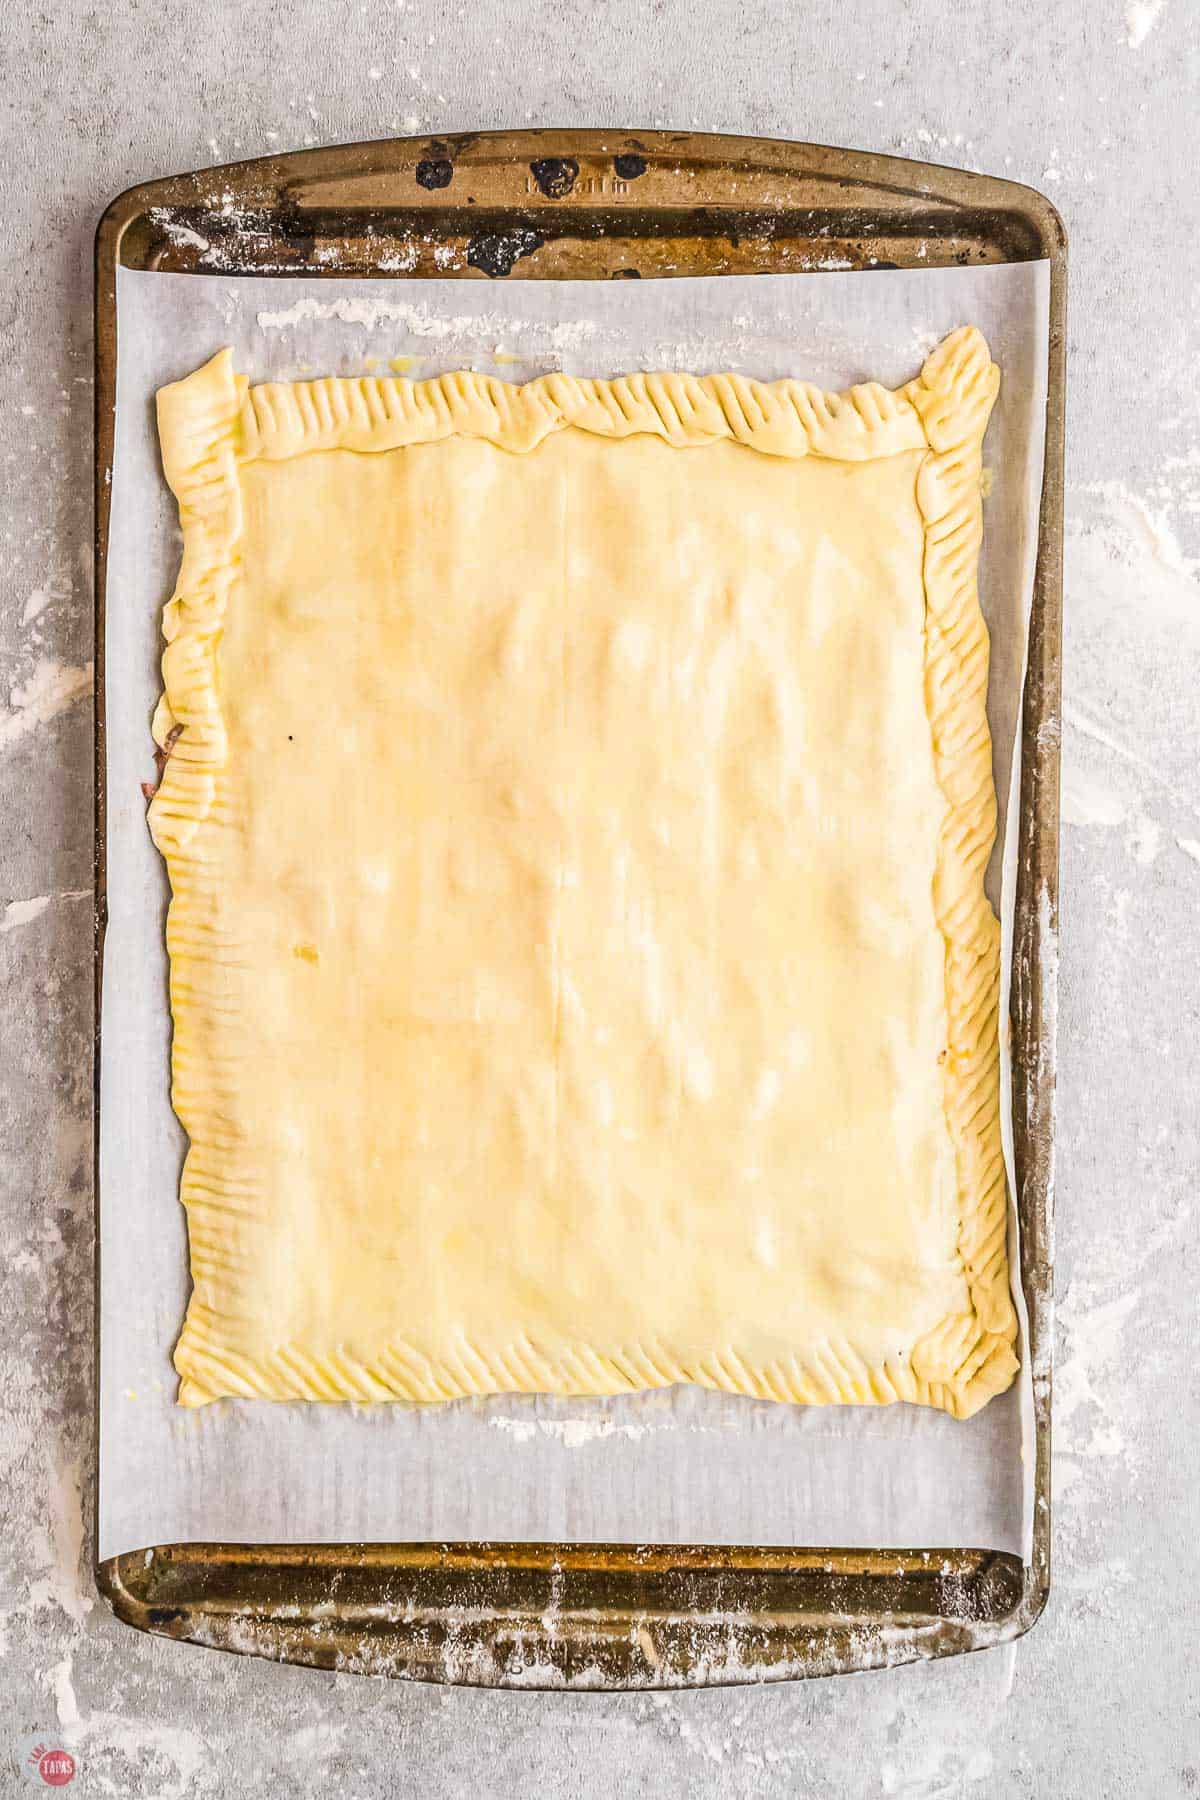 puff pastry on a baking sheet covered with egg wash